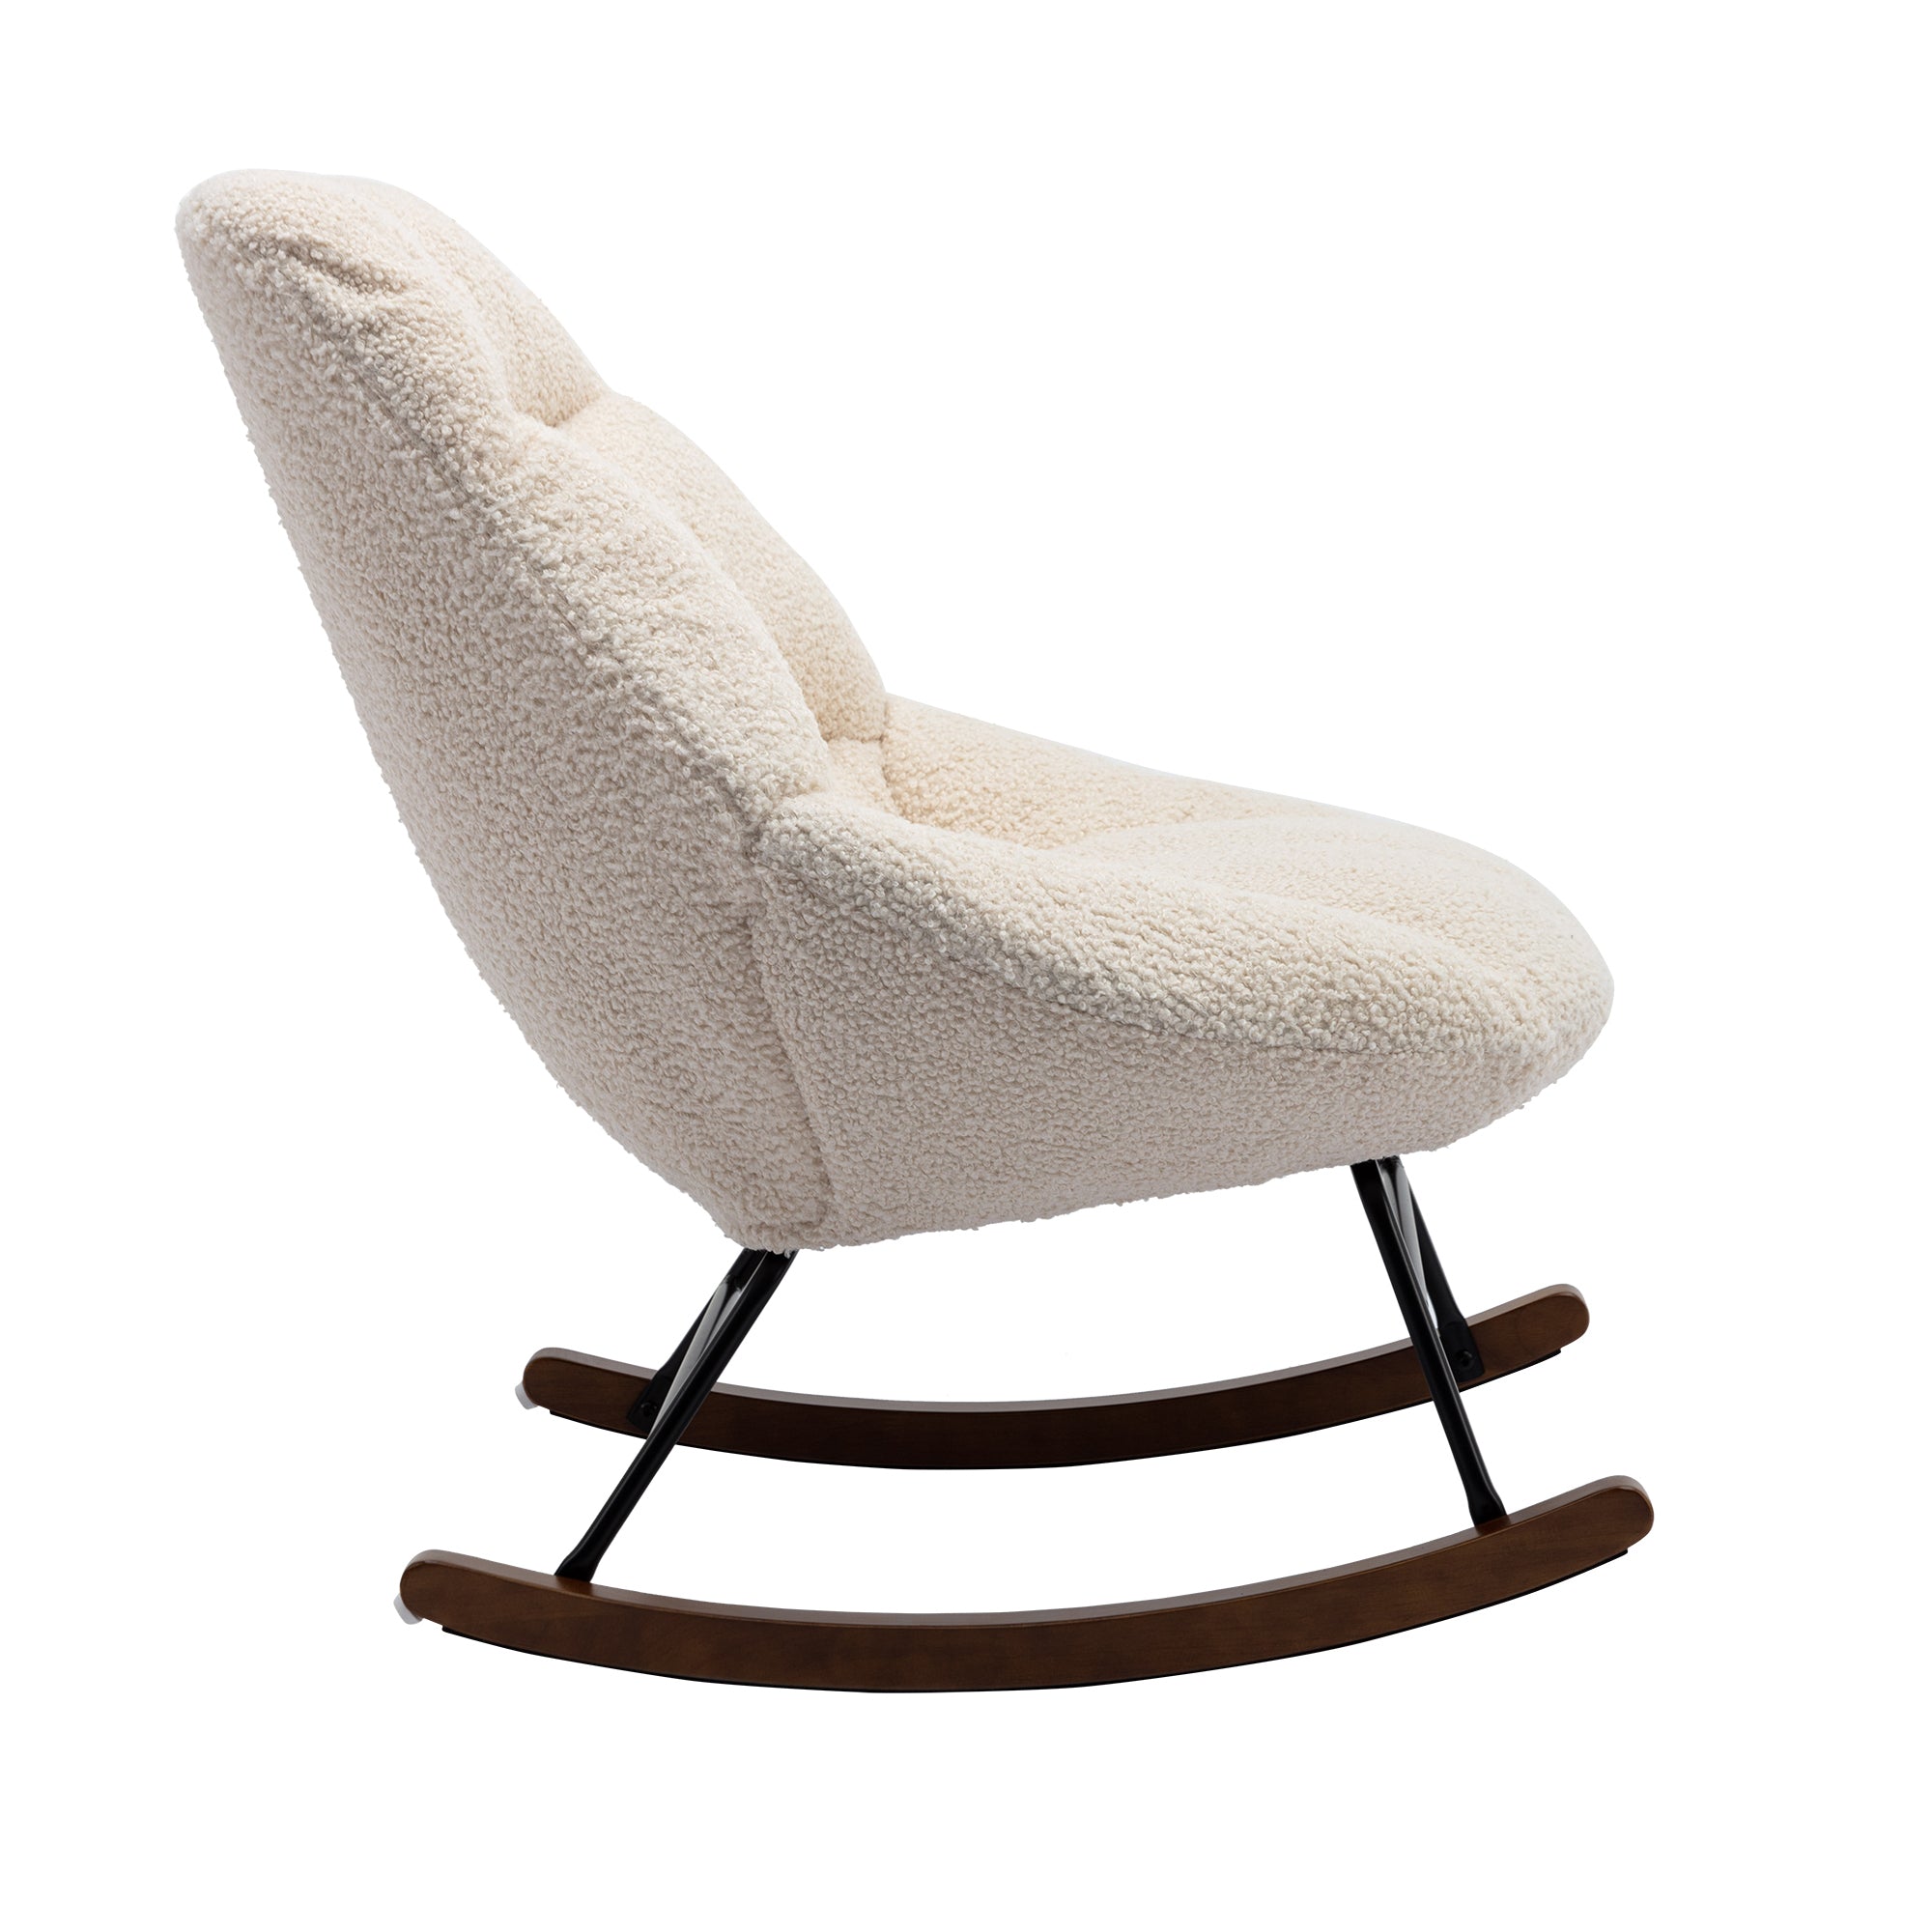 Tufted Rocking Chair